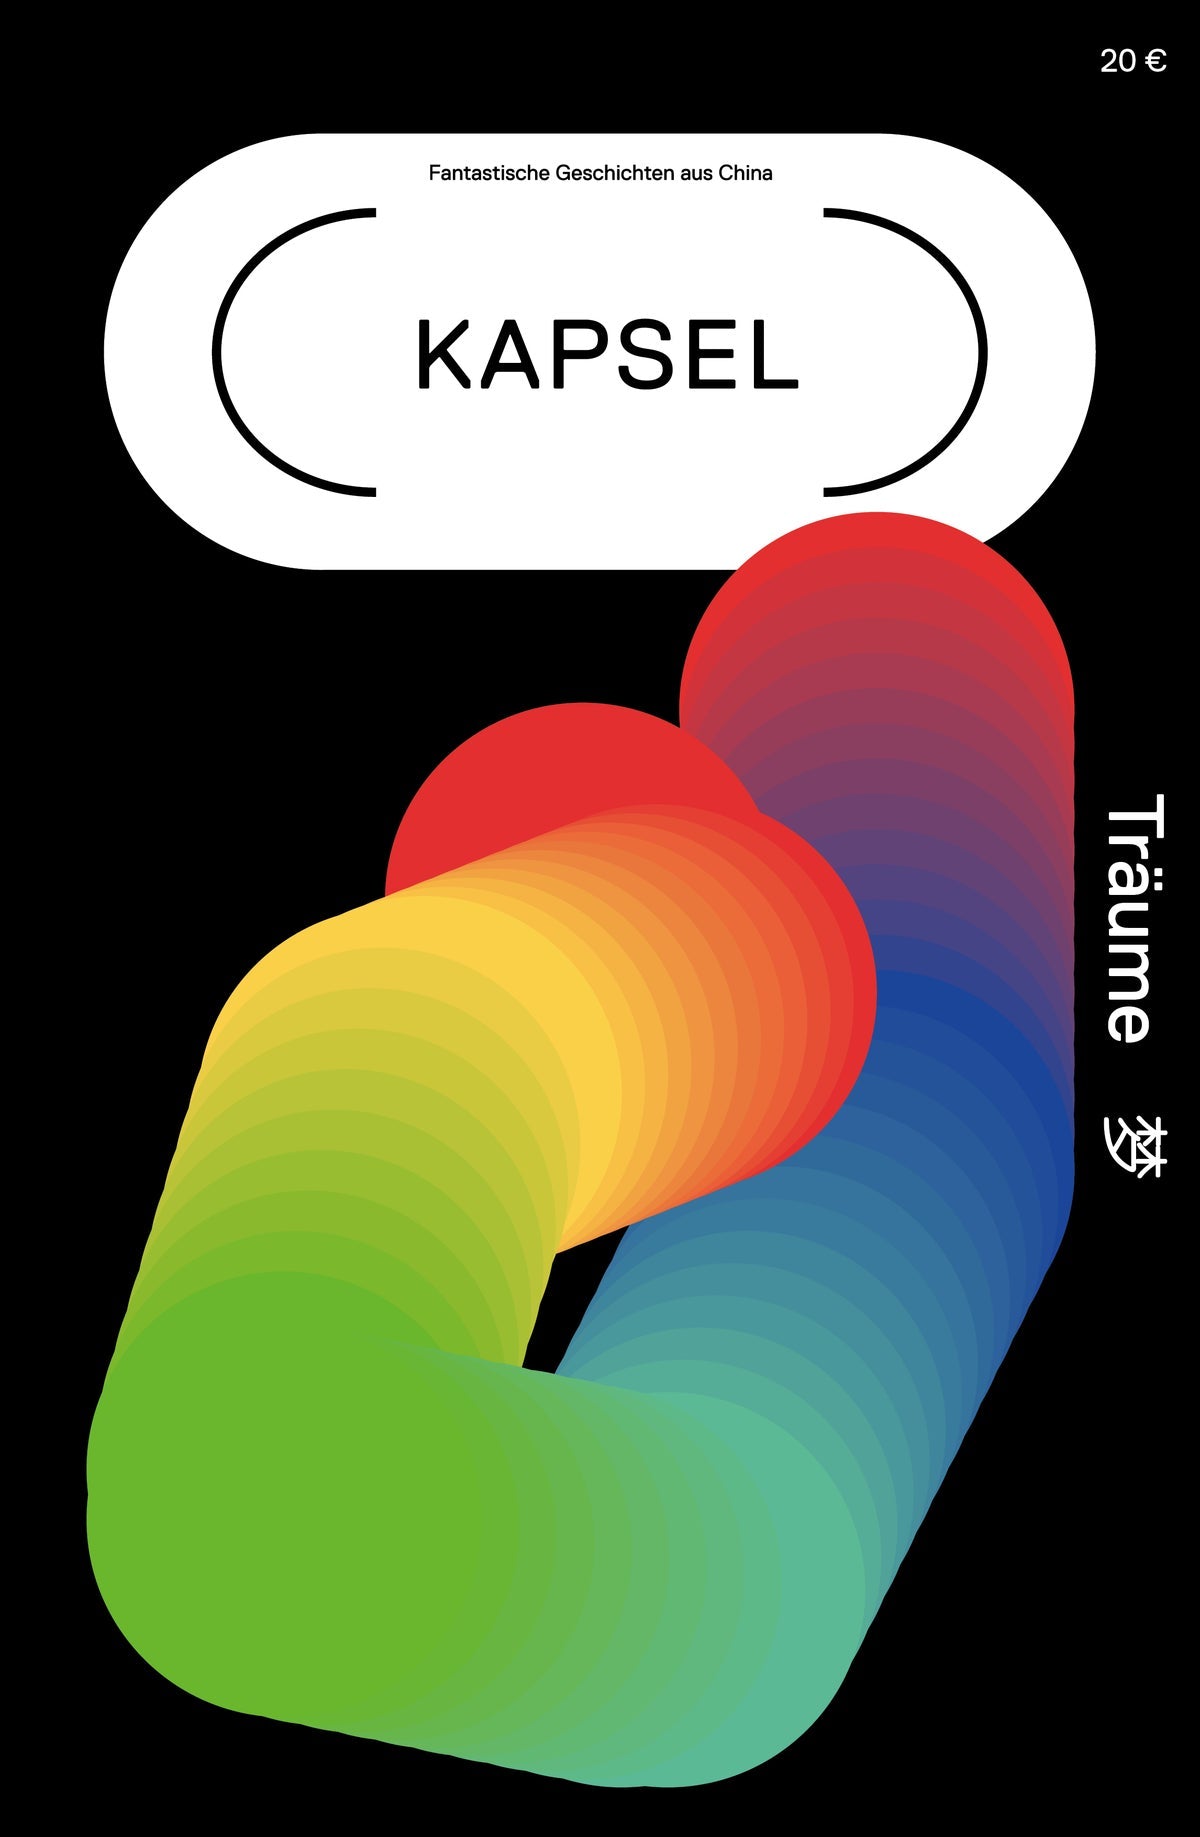 Black book cover with a white oval near the top, in which "Fantastische Geschichten aus China: Kapsel" is written. In the middle of the cover theres a very thick rainbow lines made of individual circles.